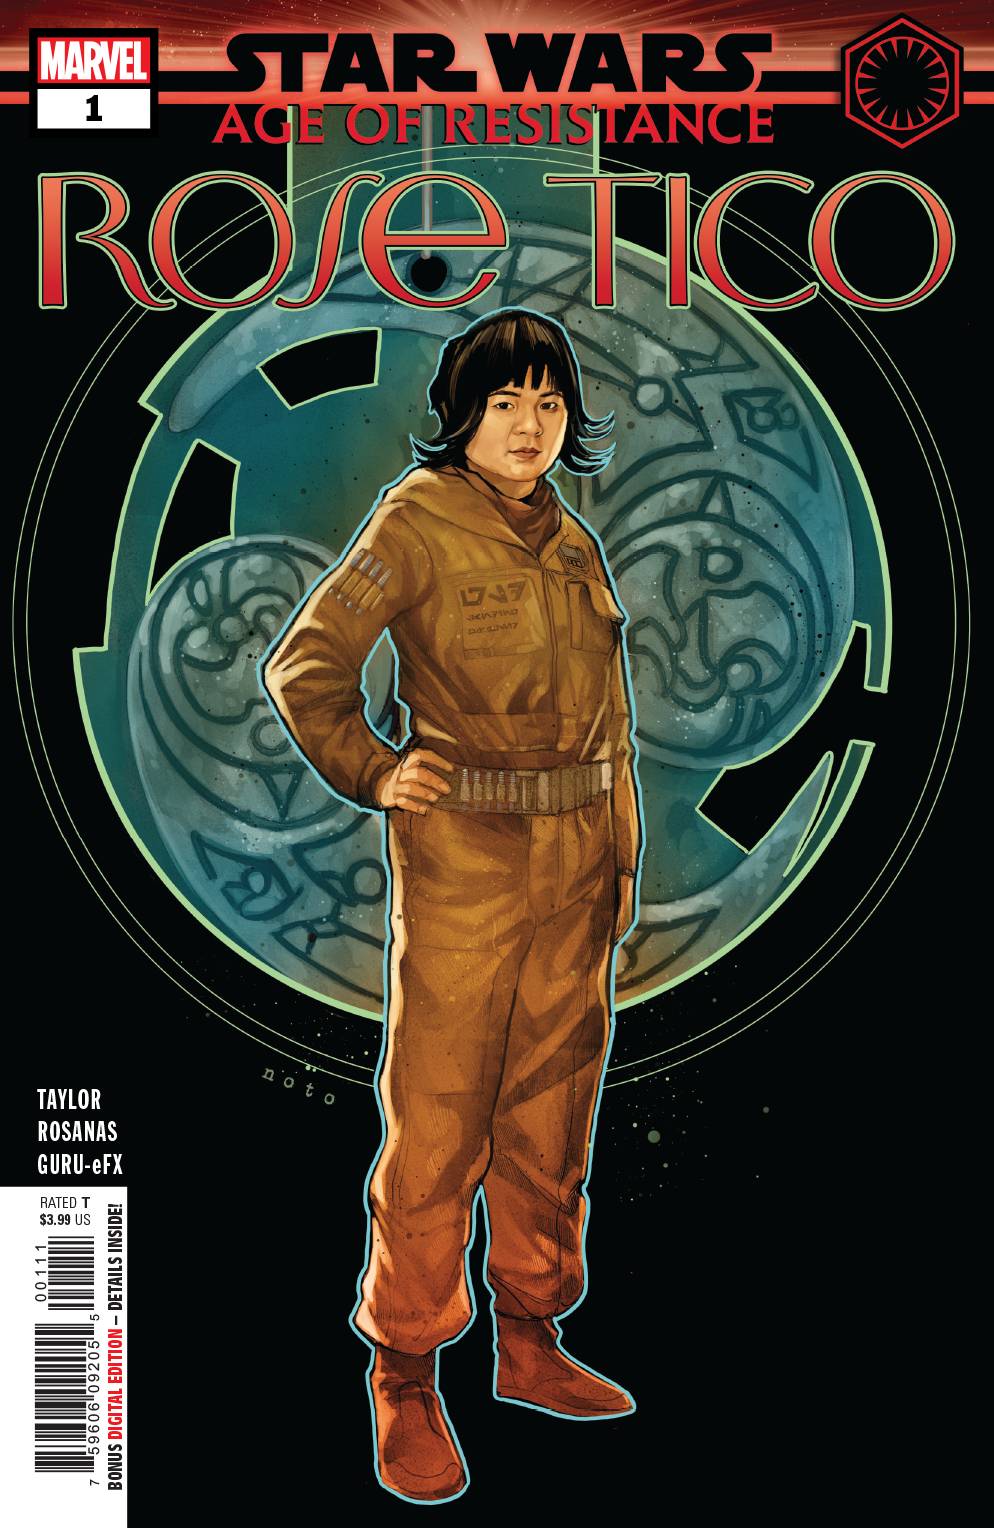 Star Wars Age of Resistance Rose Tico #1